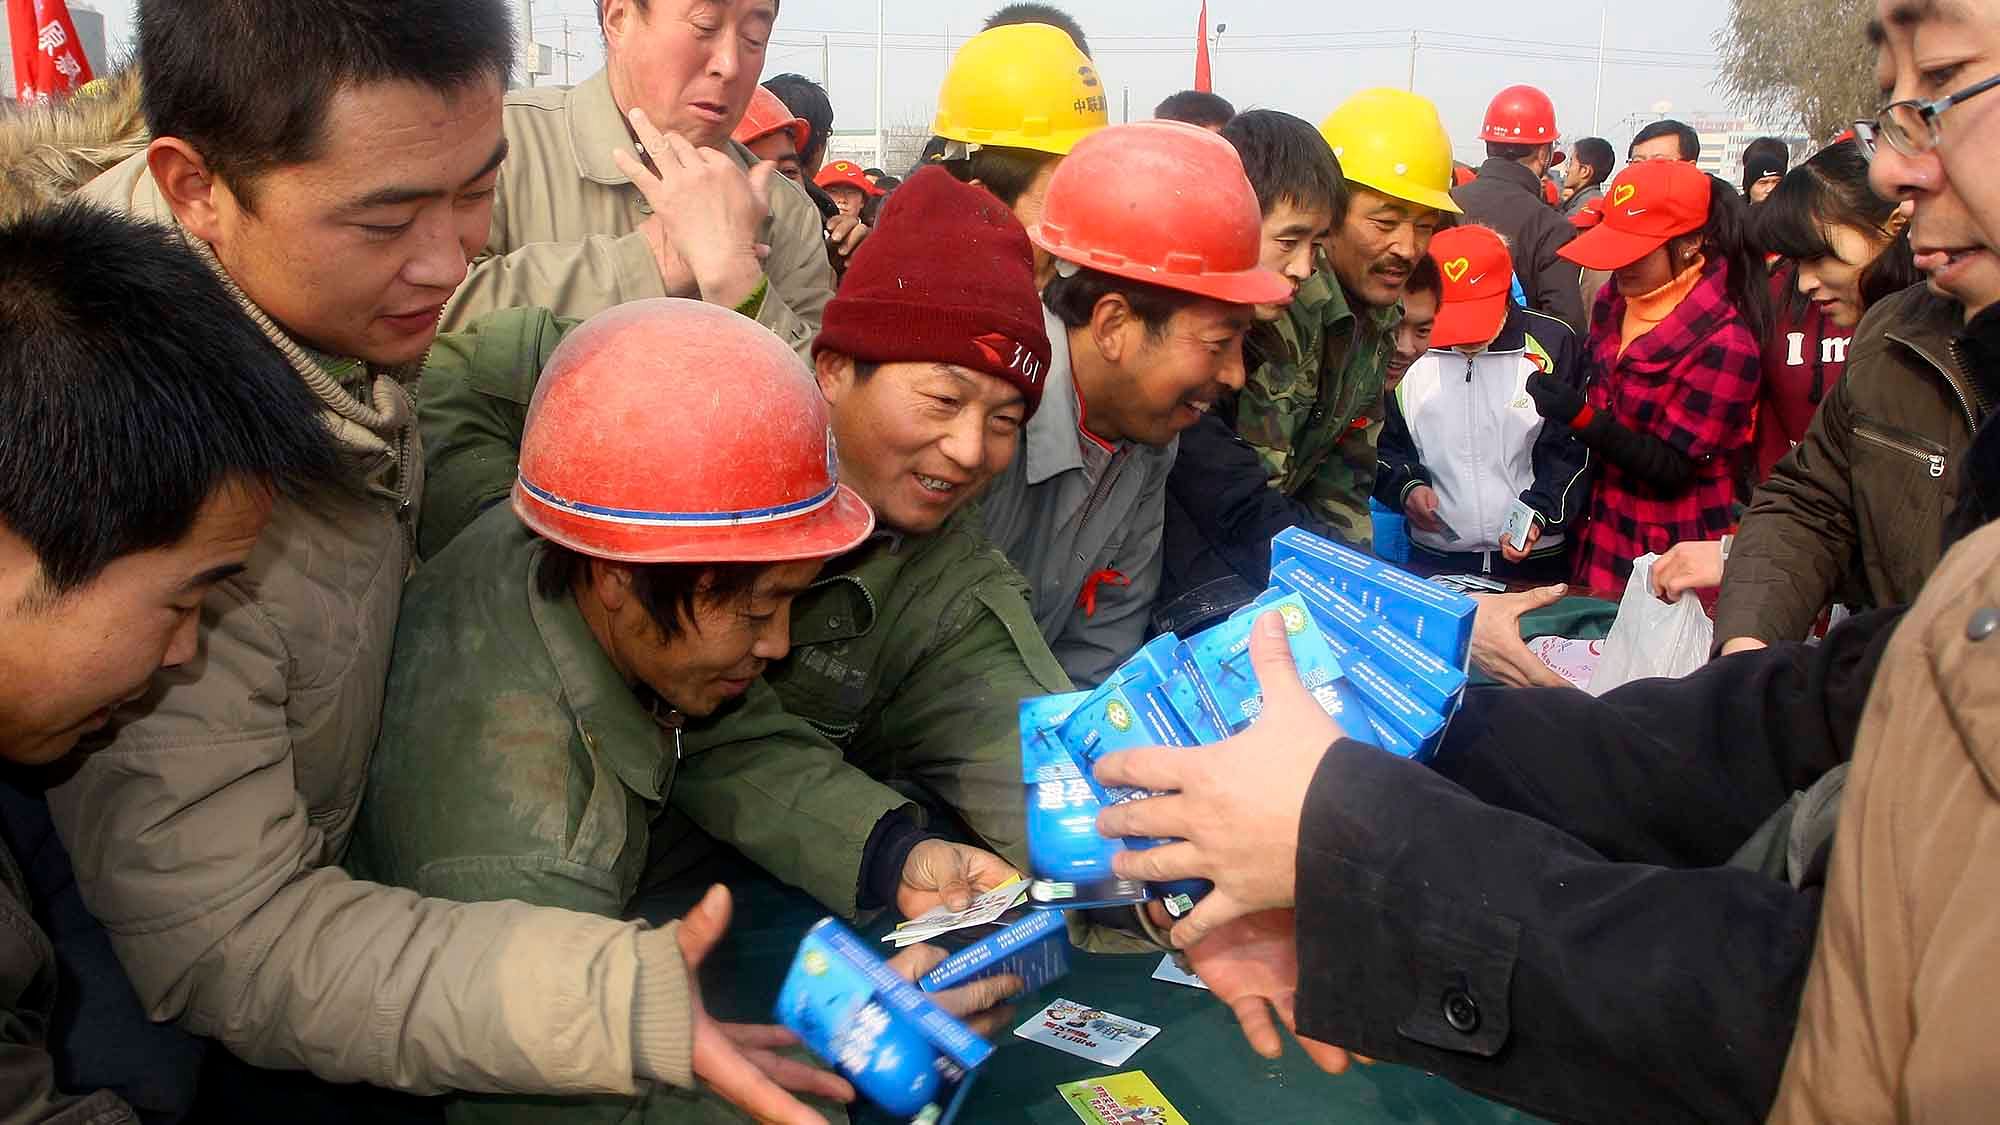 China’s migrant workers flock to get free condoms during an HIV/AIDS
awareness campaign. (Photo: Reuters) &nbsp; &nbsp; &nbsp;